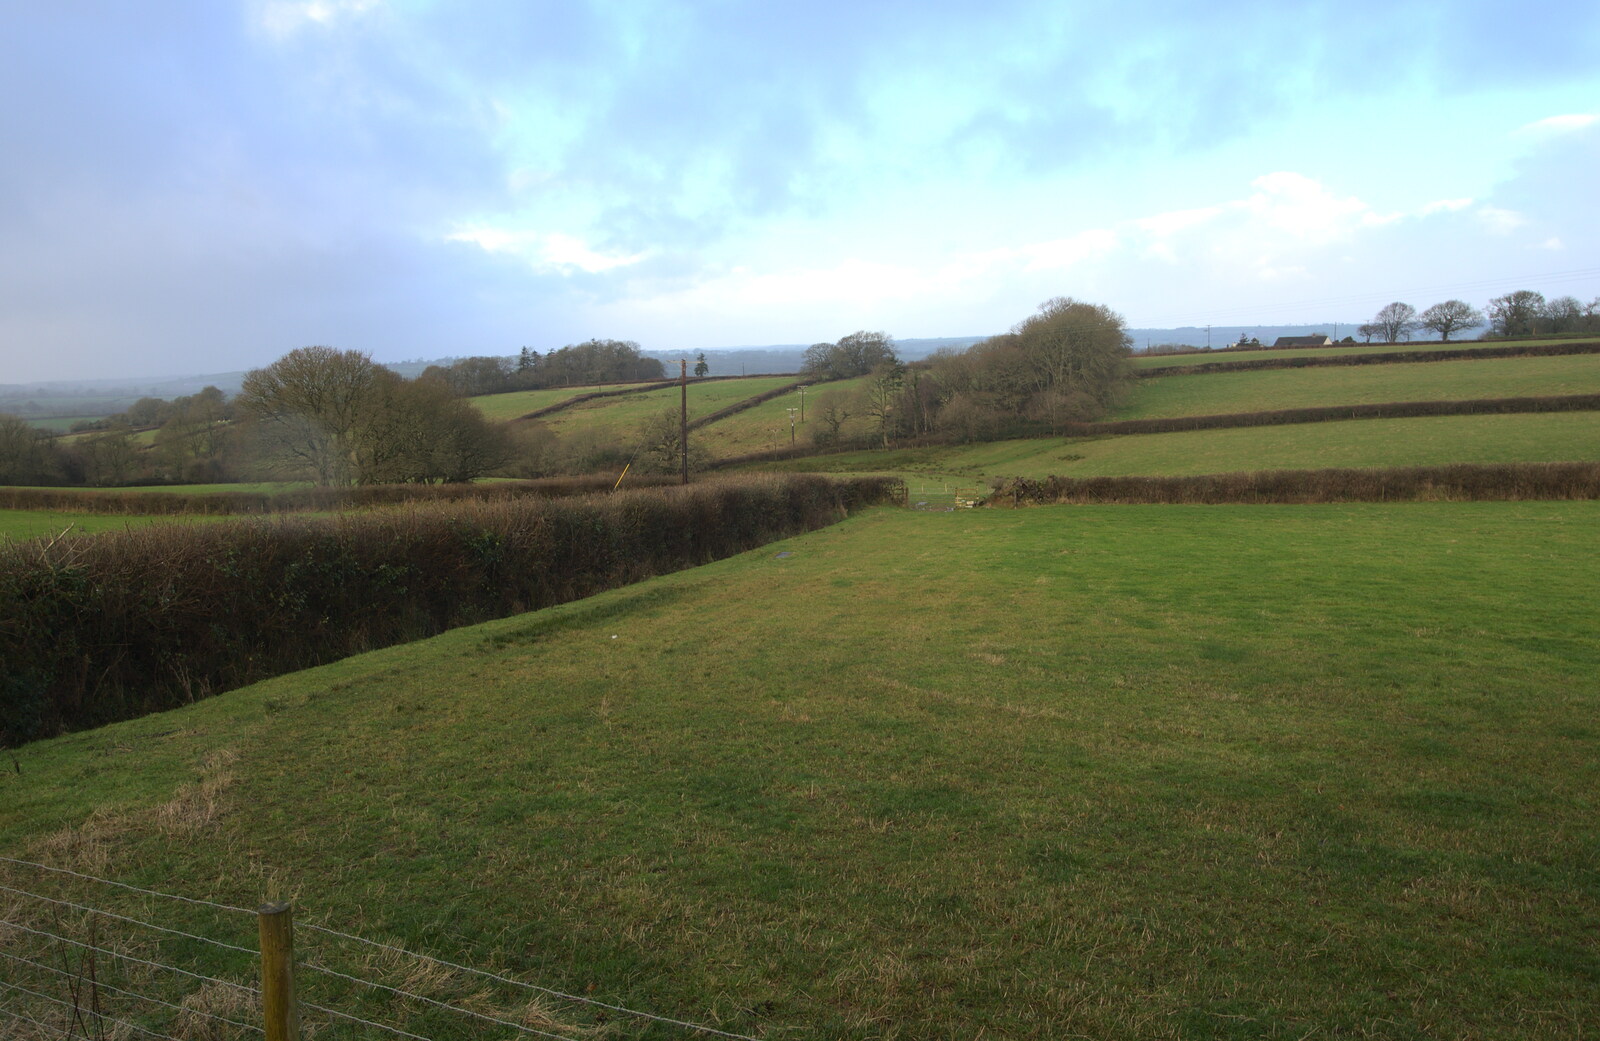 The view from Mother's garden from The Boxing Day Hunt, Chagford, Devon - 26th December 2012